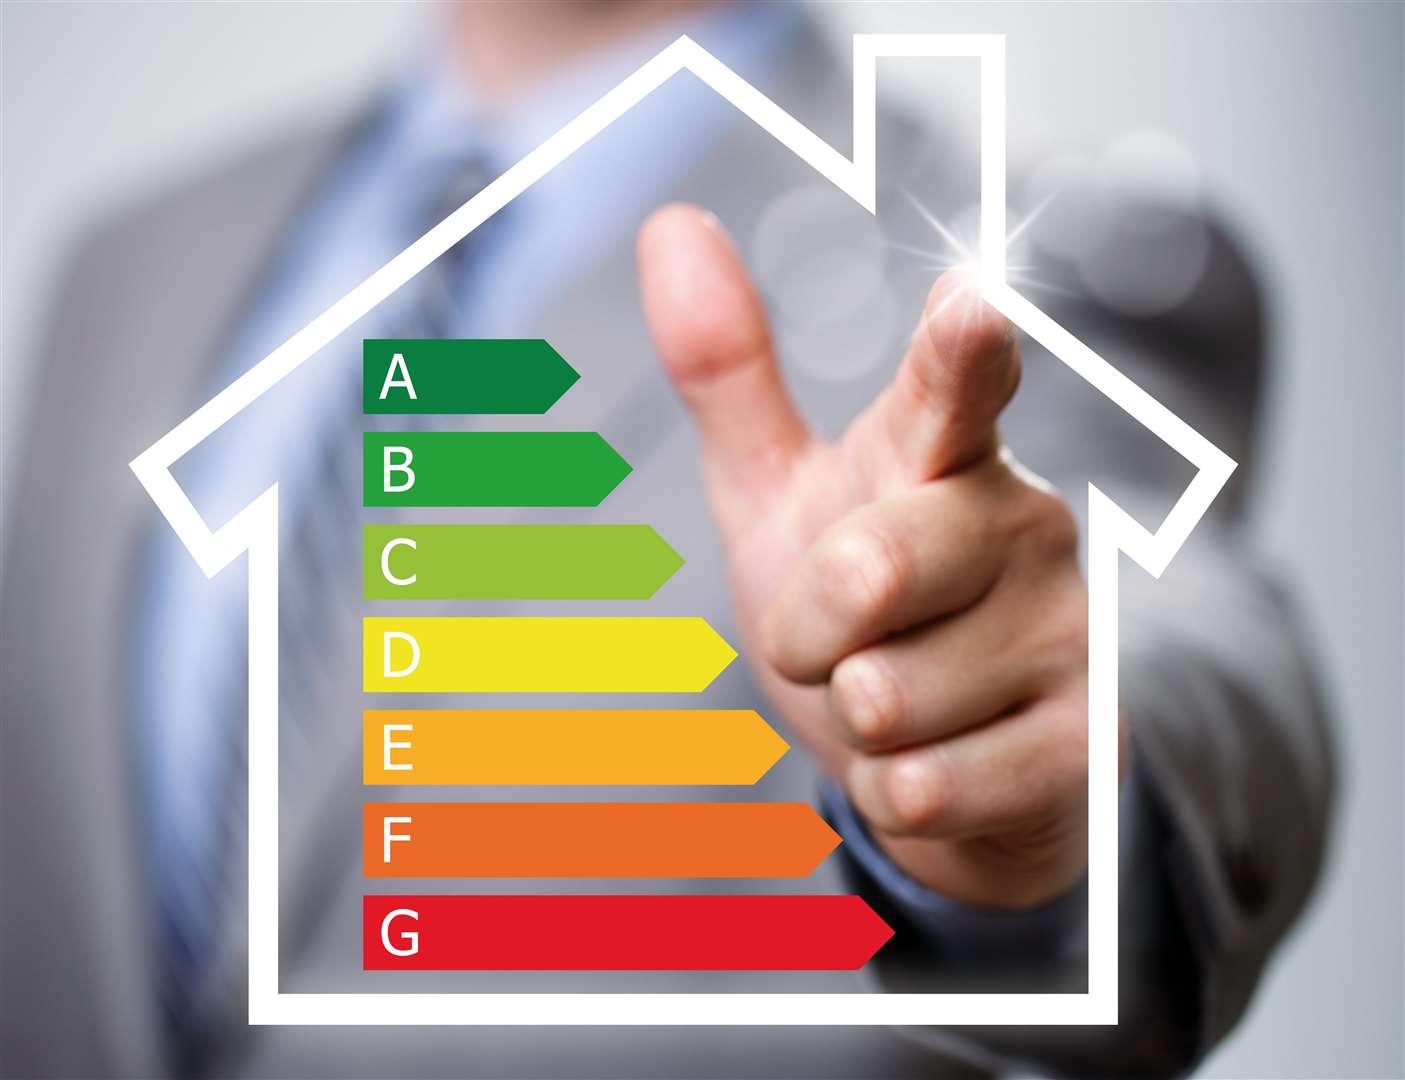 Extra funding is being made available for low income householders to adopt energy saving measures in their homes.